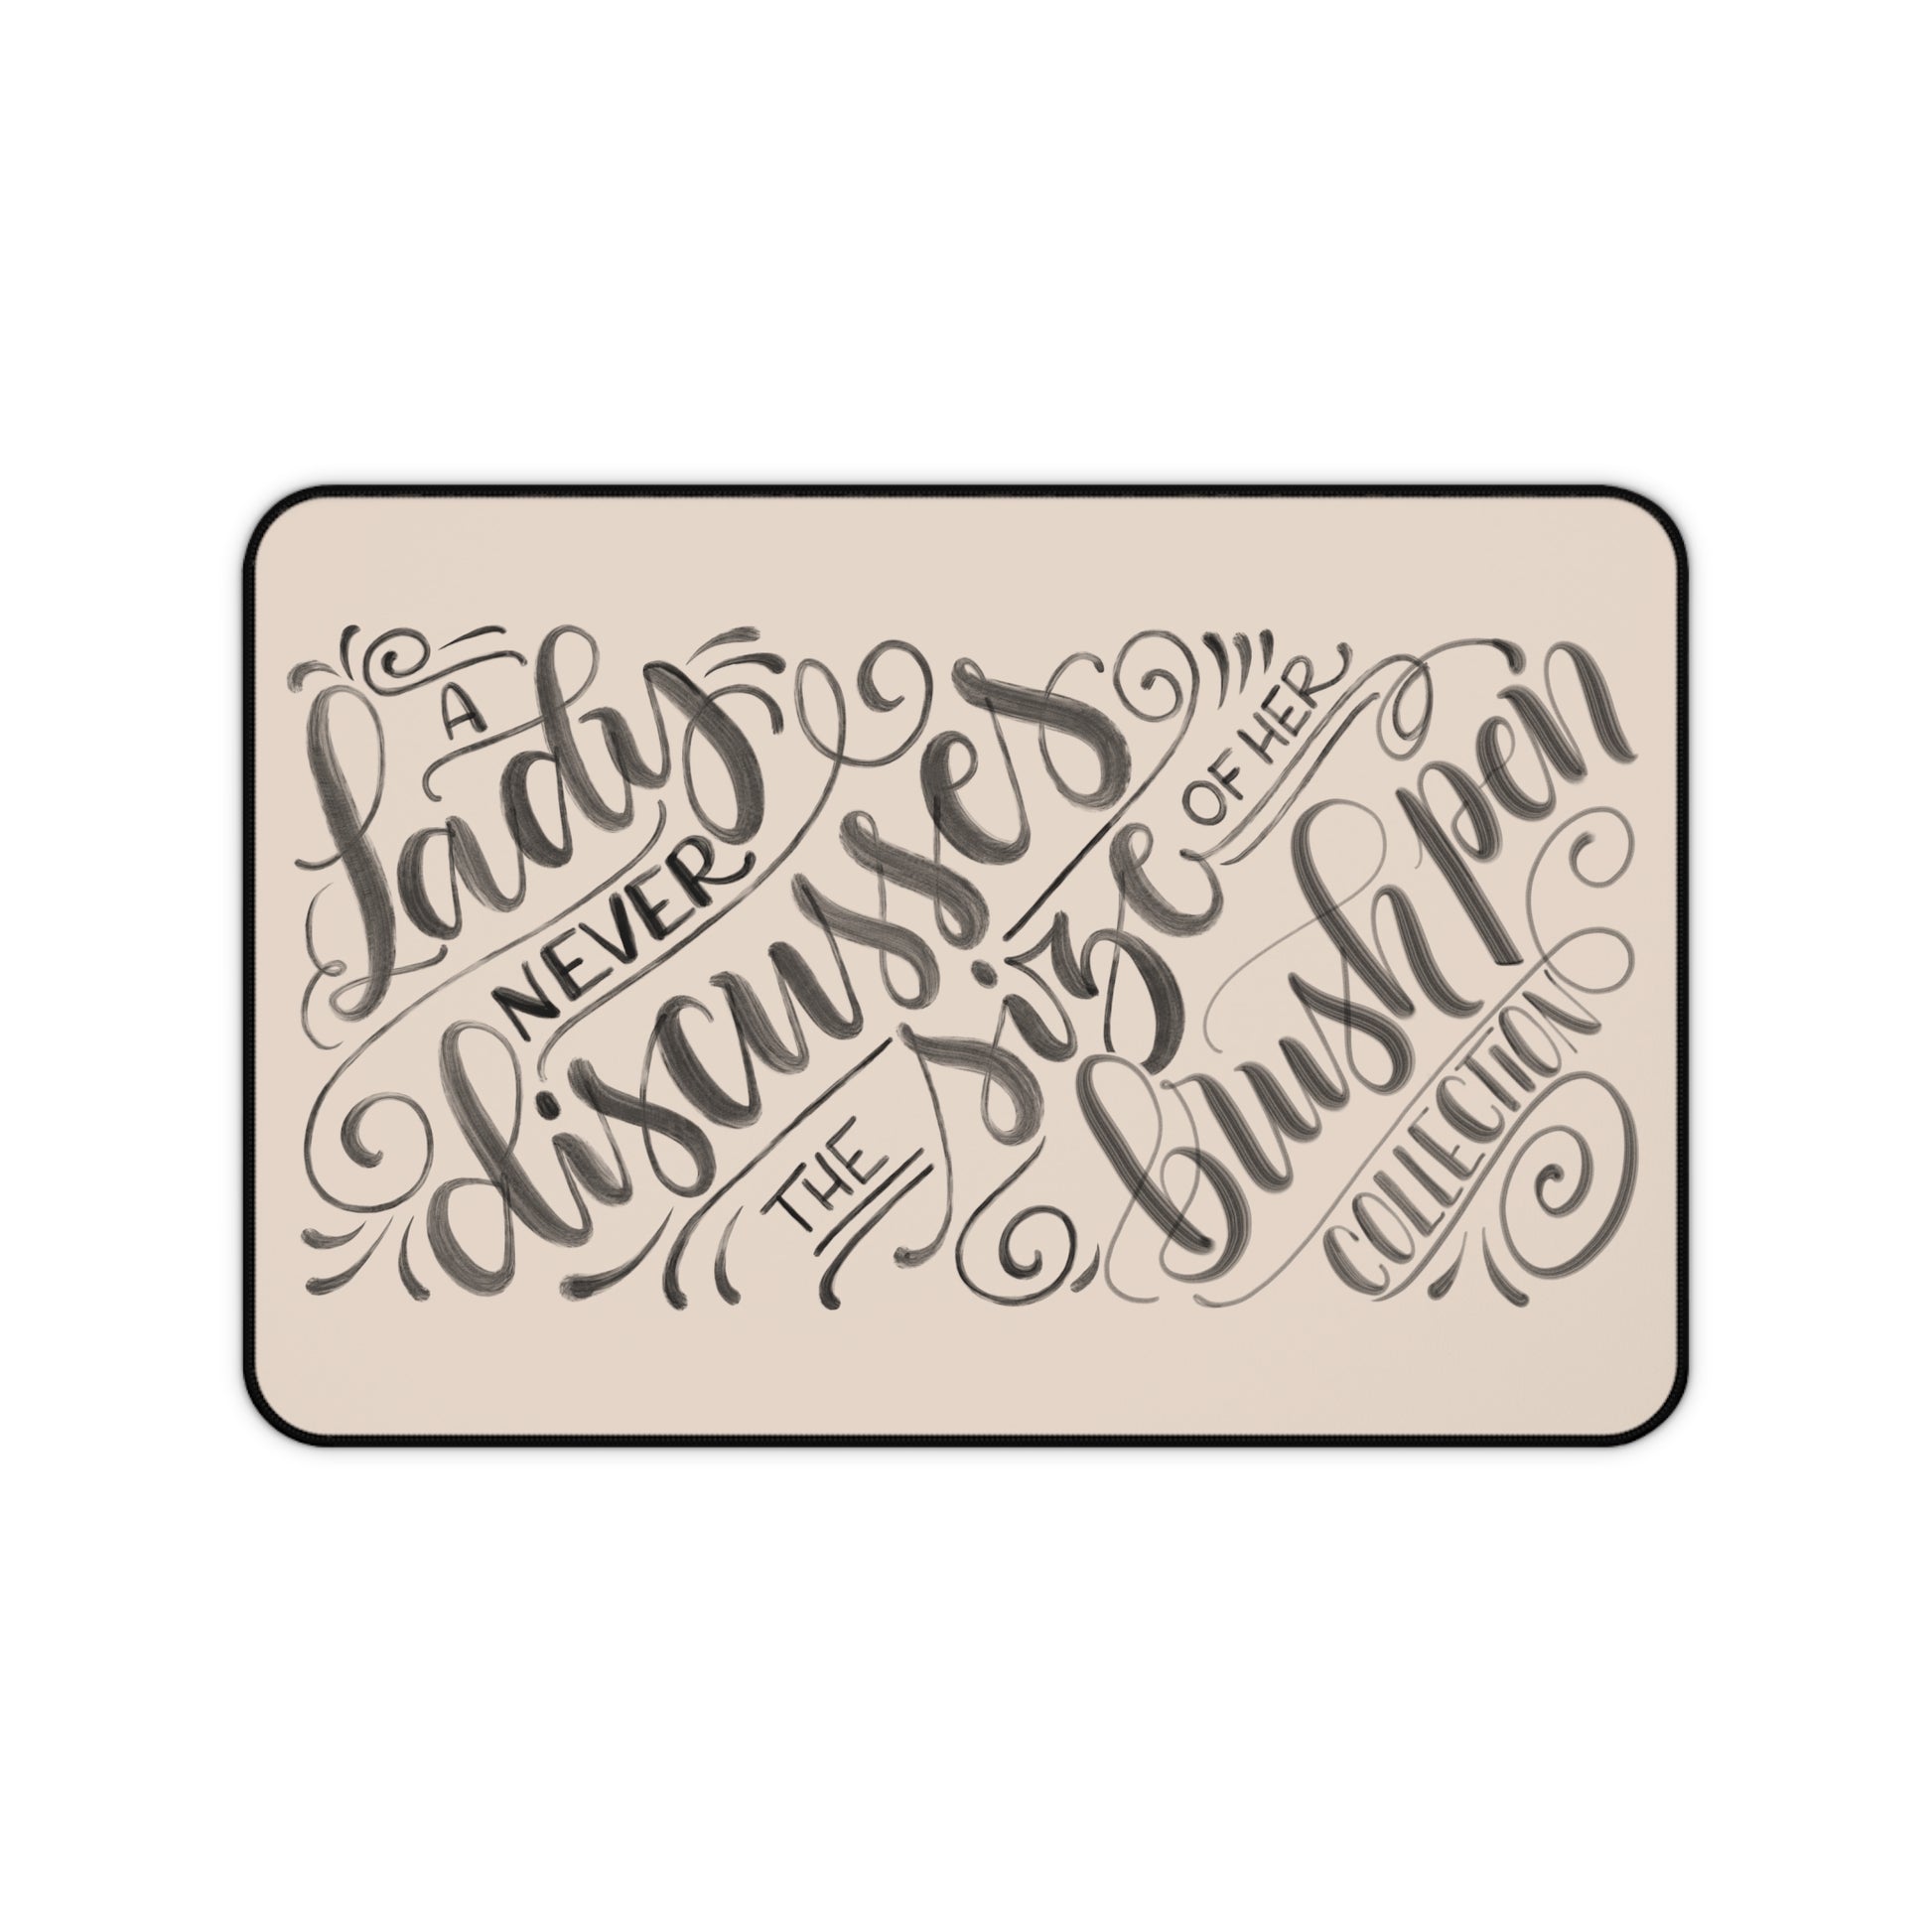 A lady never discusses the size of her brush pen collection - Tan Desk Mat - howjoyfulshop